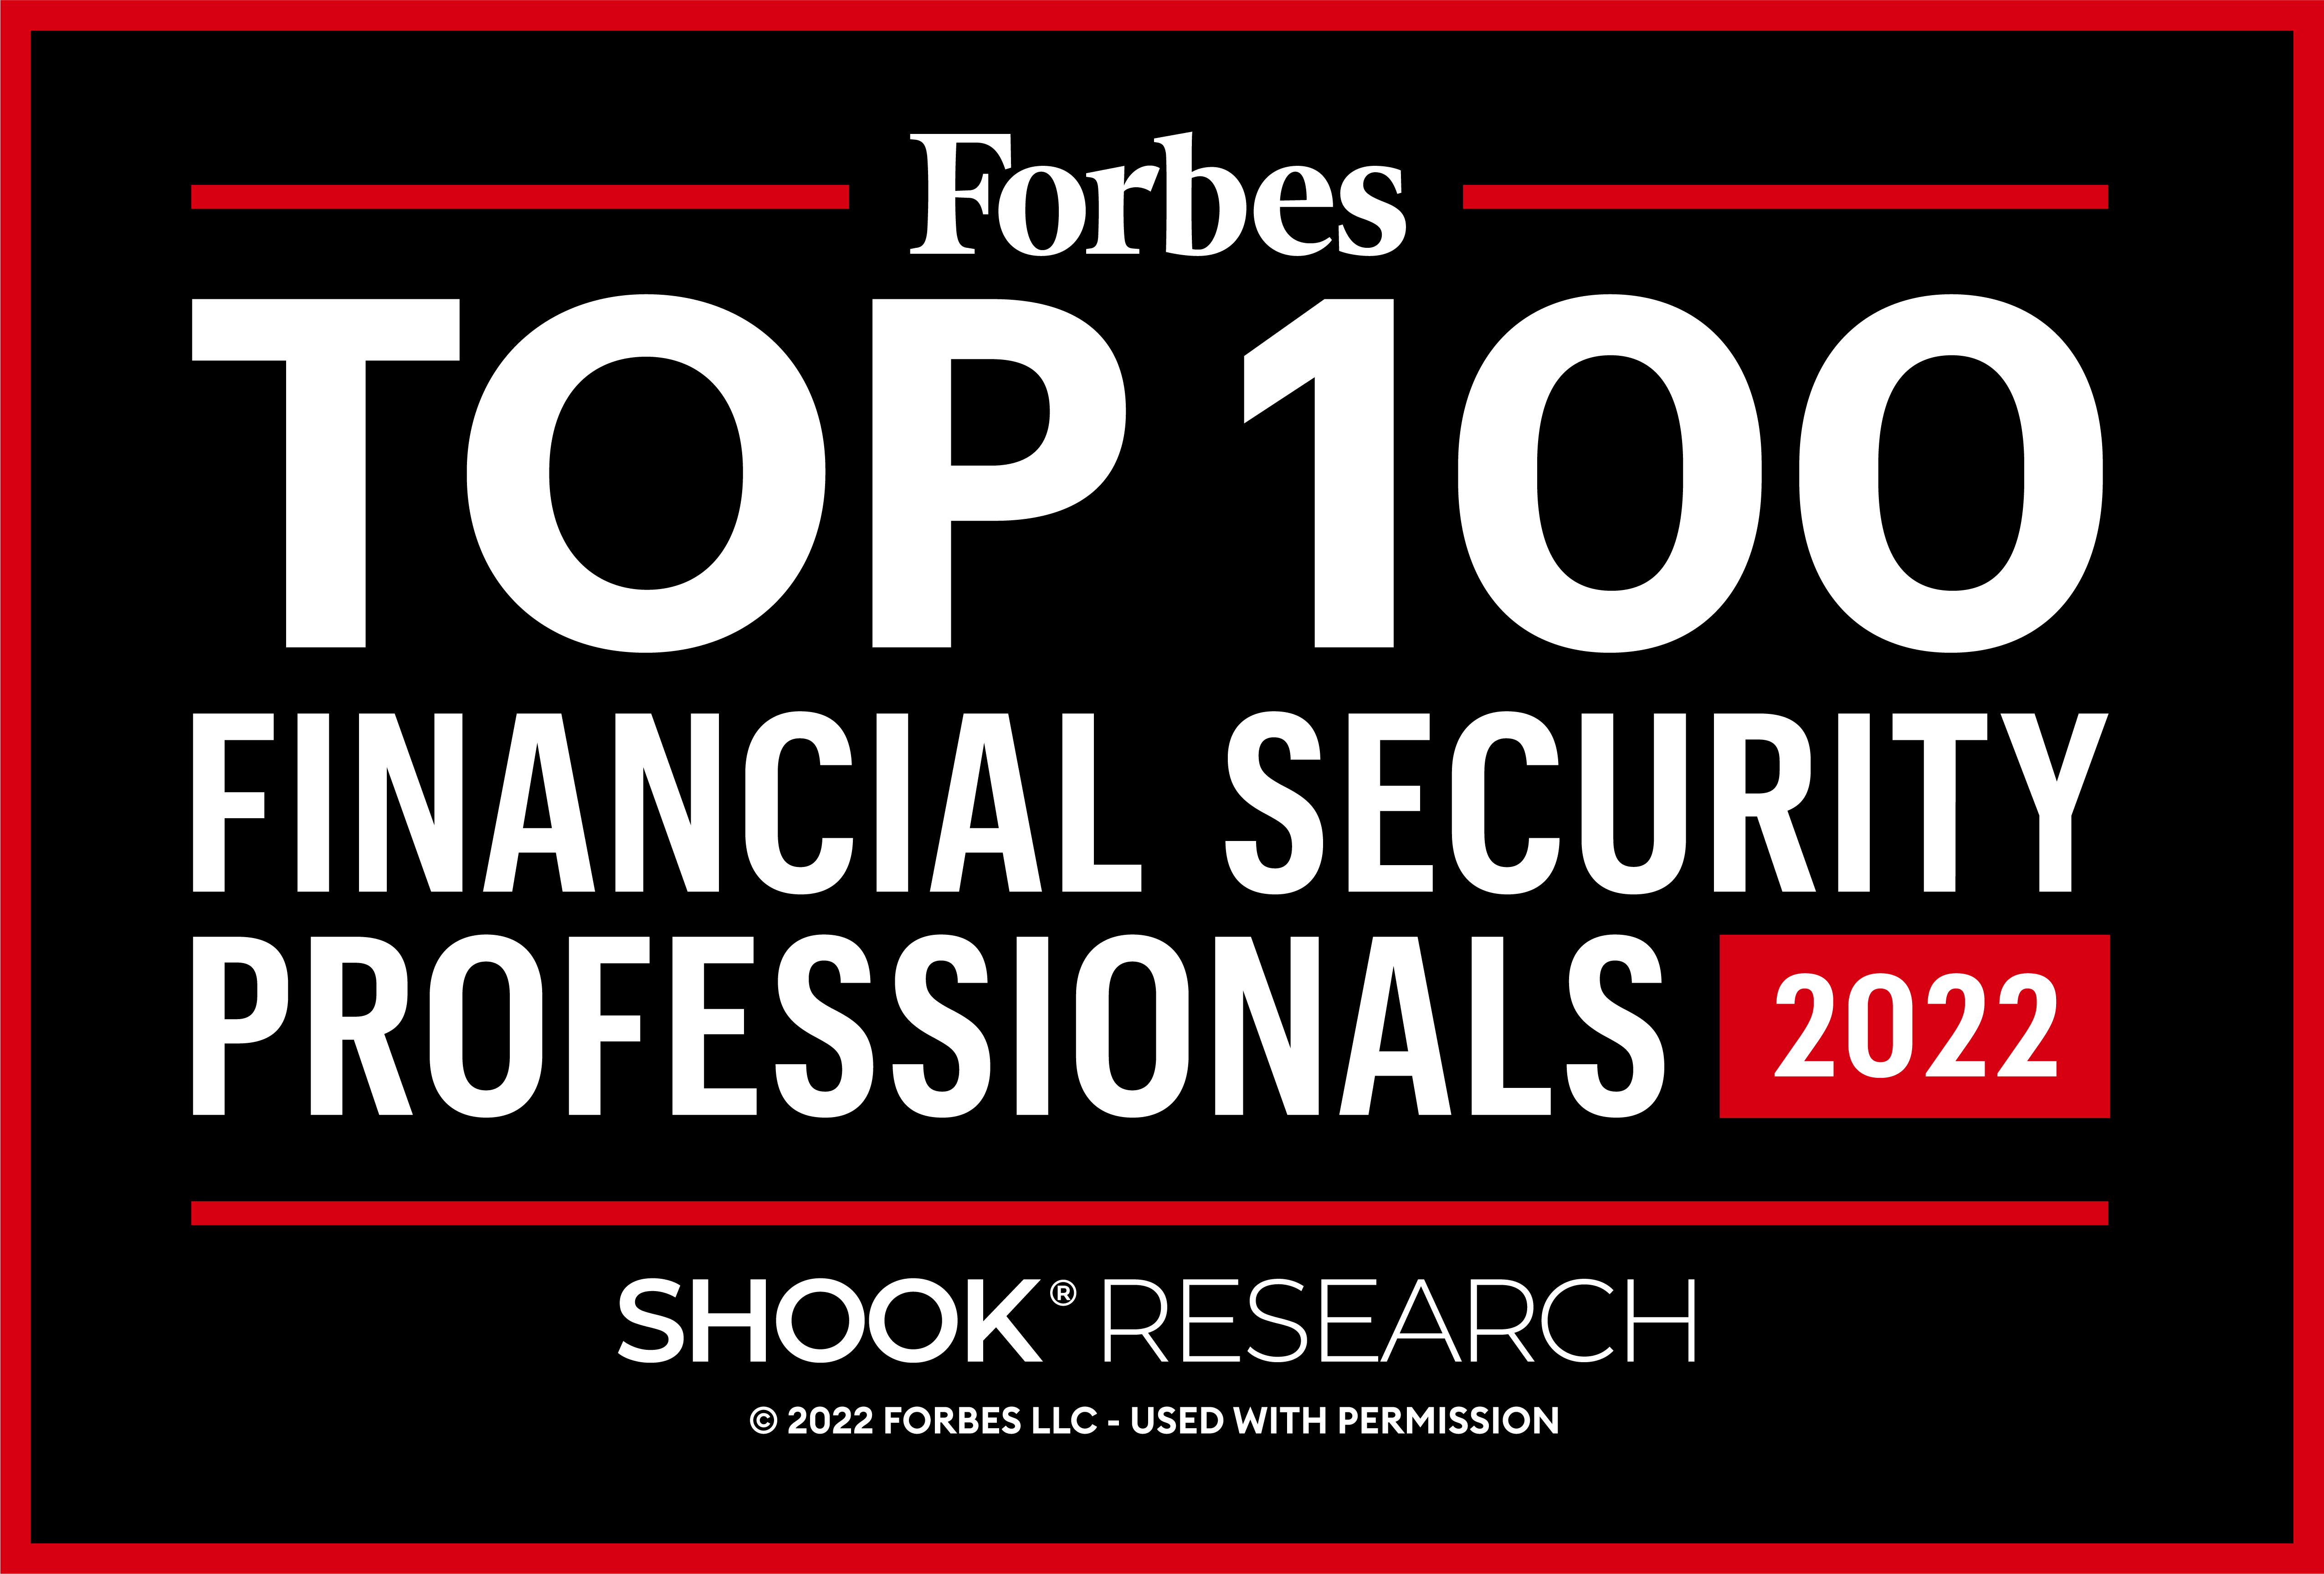 Forbest Top 100 Financial Security Professionals 2022